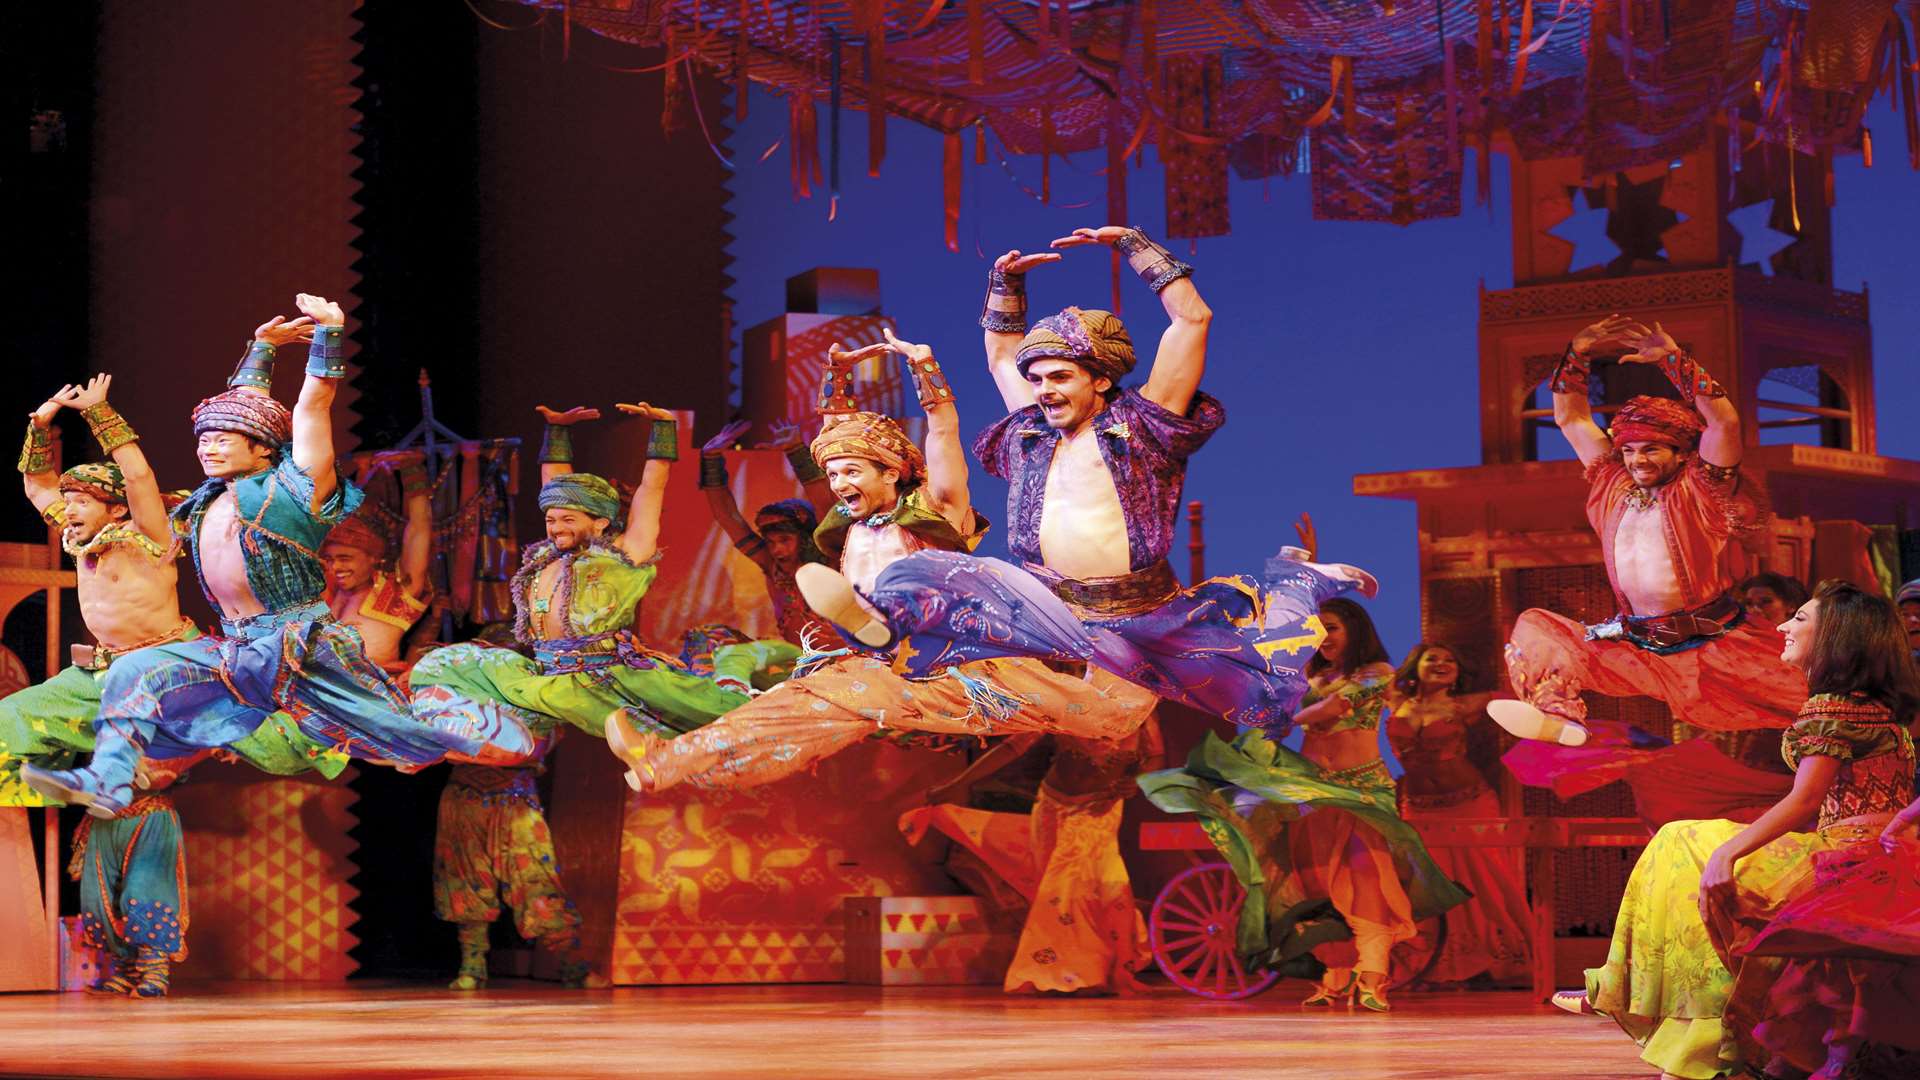 The production features hundreds of colourful costumes